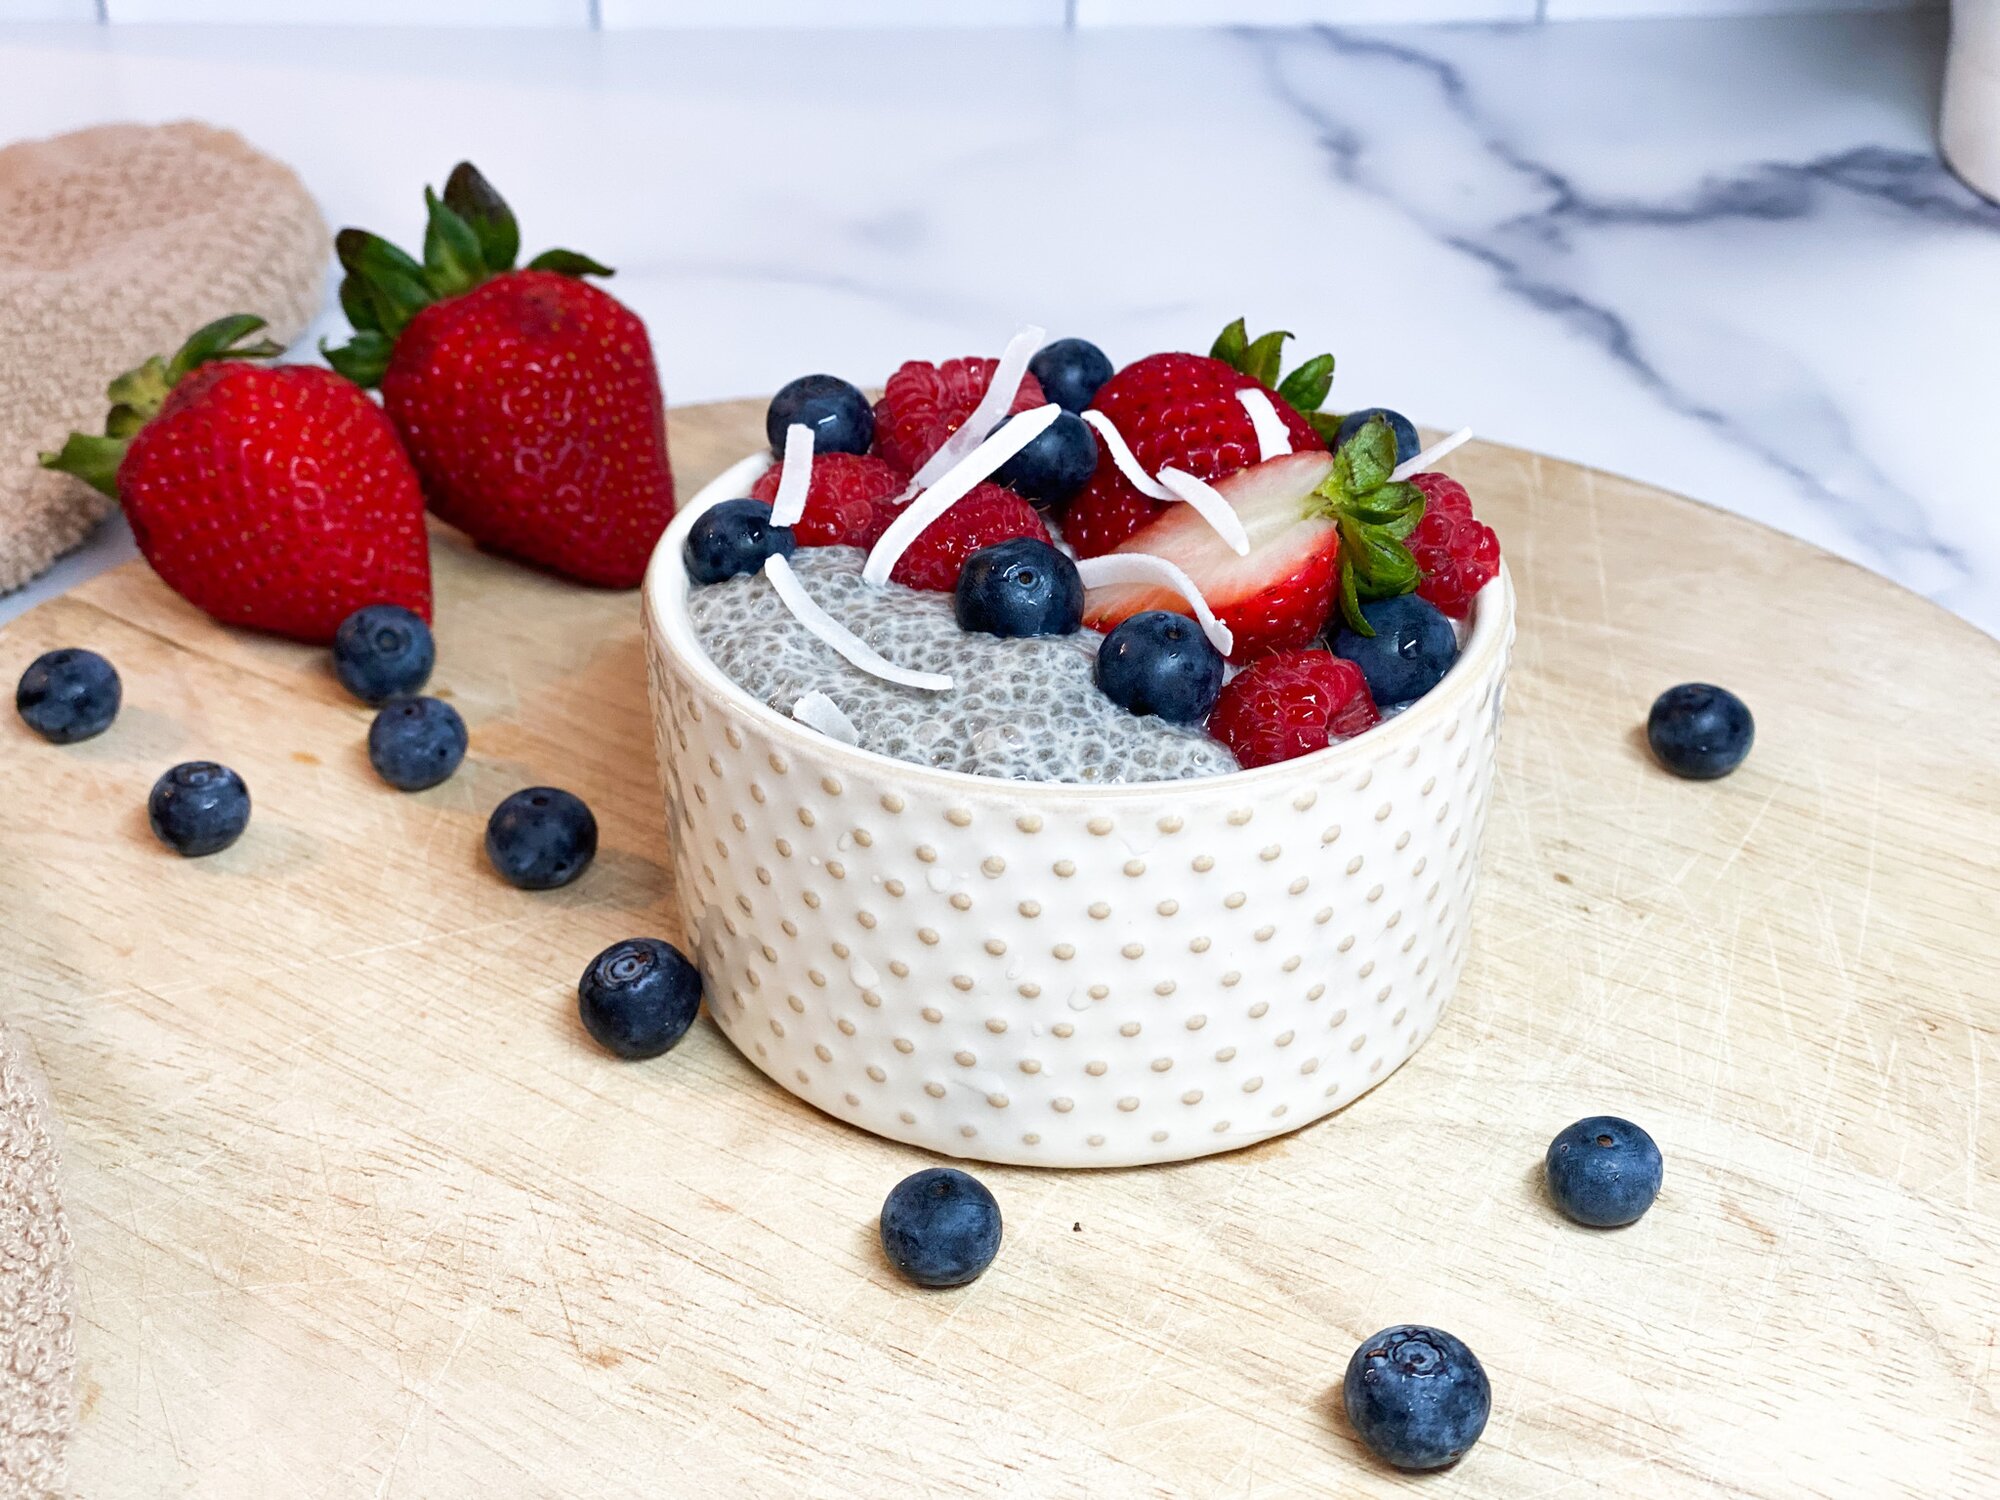 Ceramic bowl of vanilla chia pudding with fresh berries sprinkled on top. Strawberries laying next to bowl.